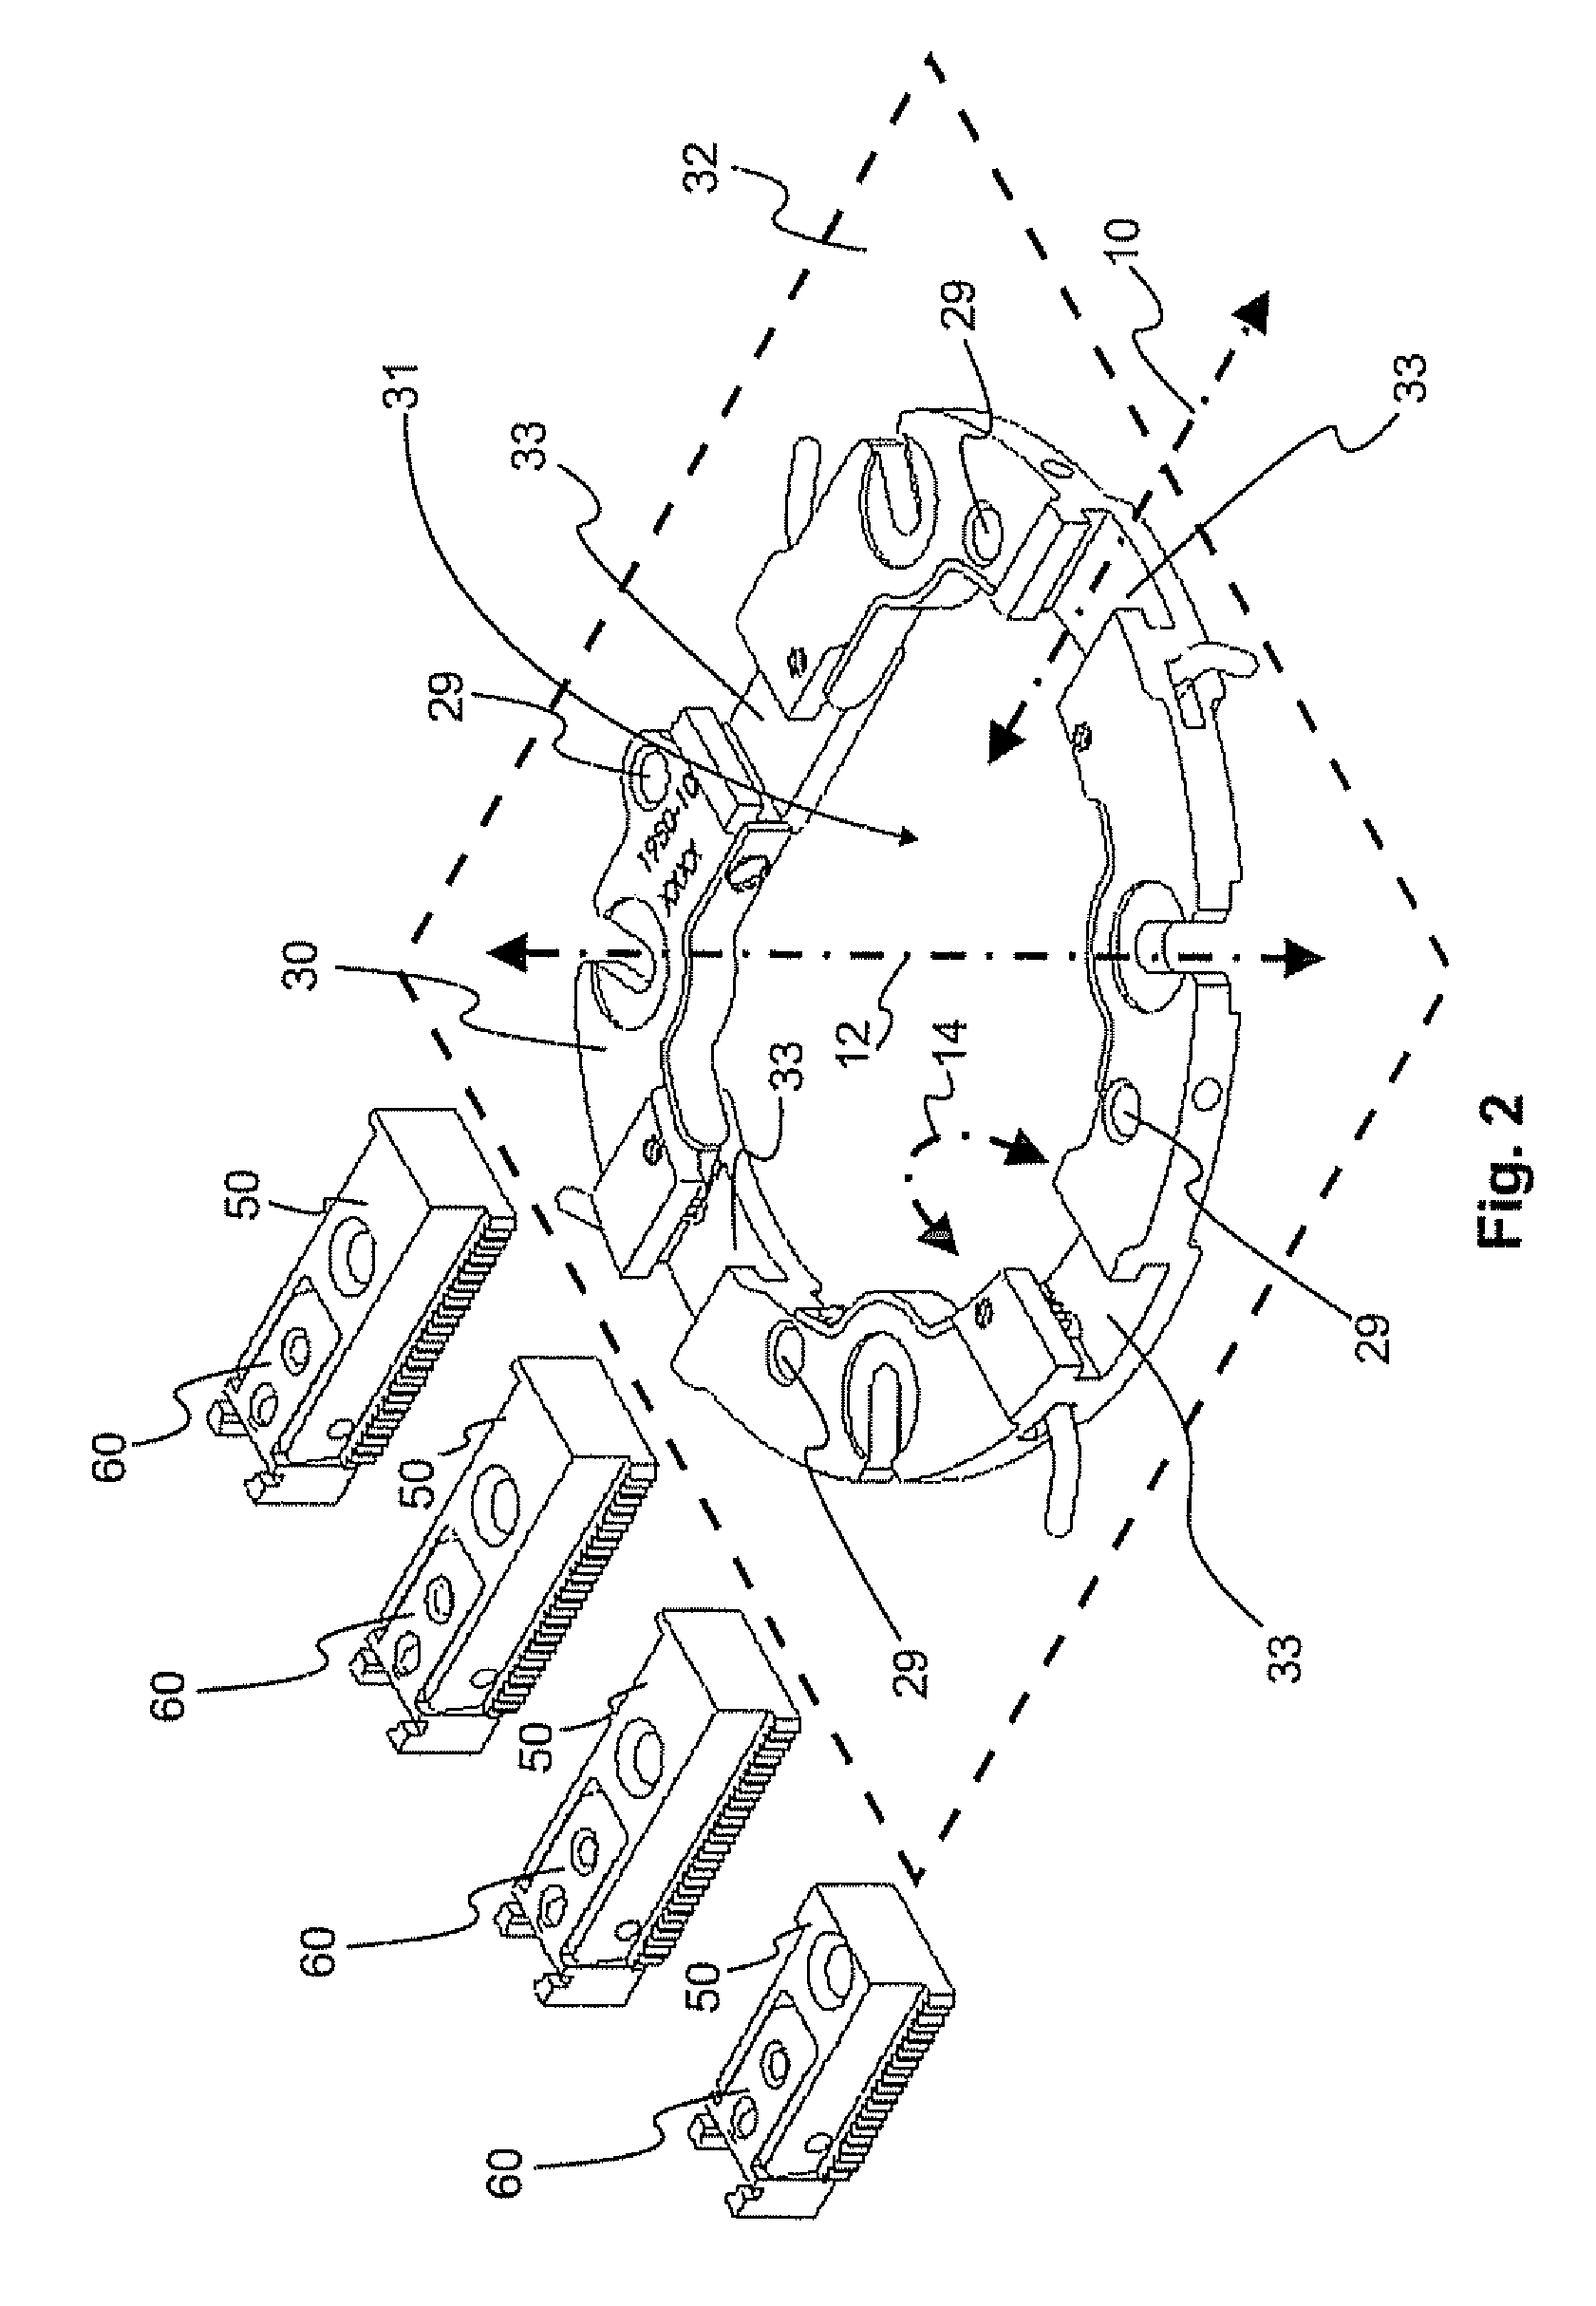 Surgical retractor and retractor assembly